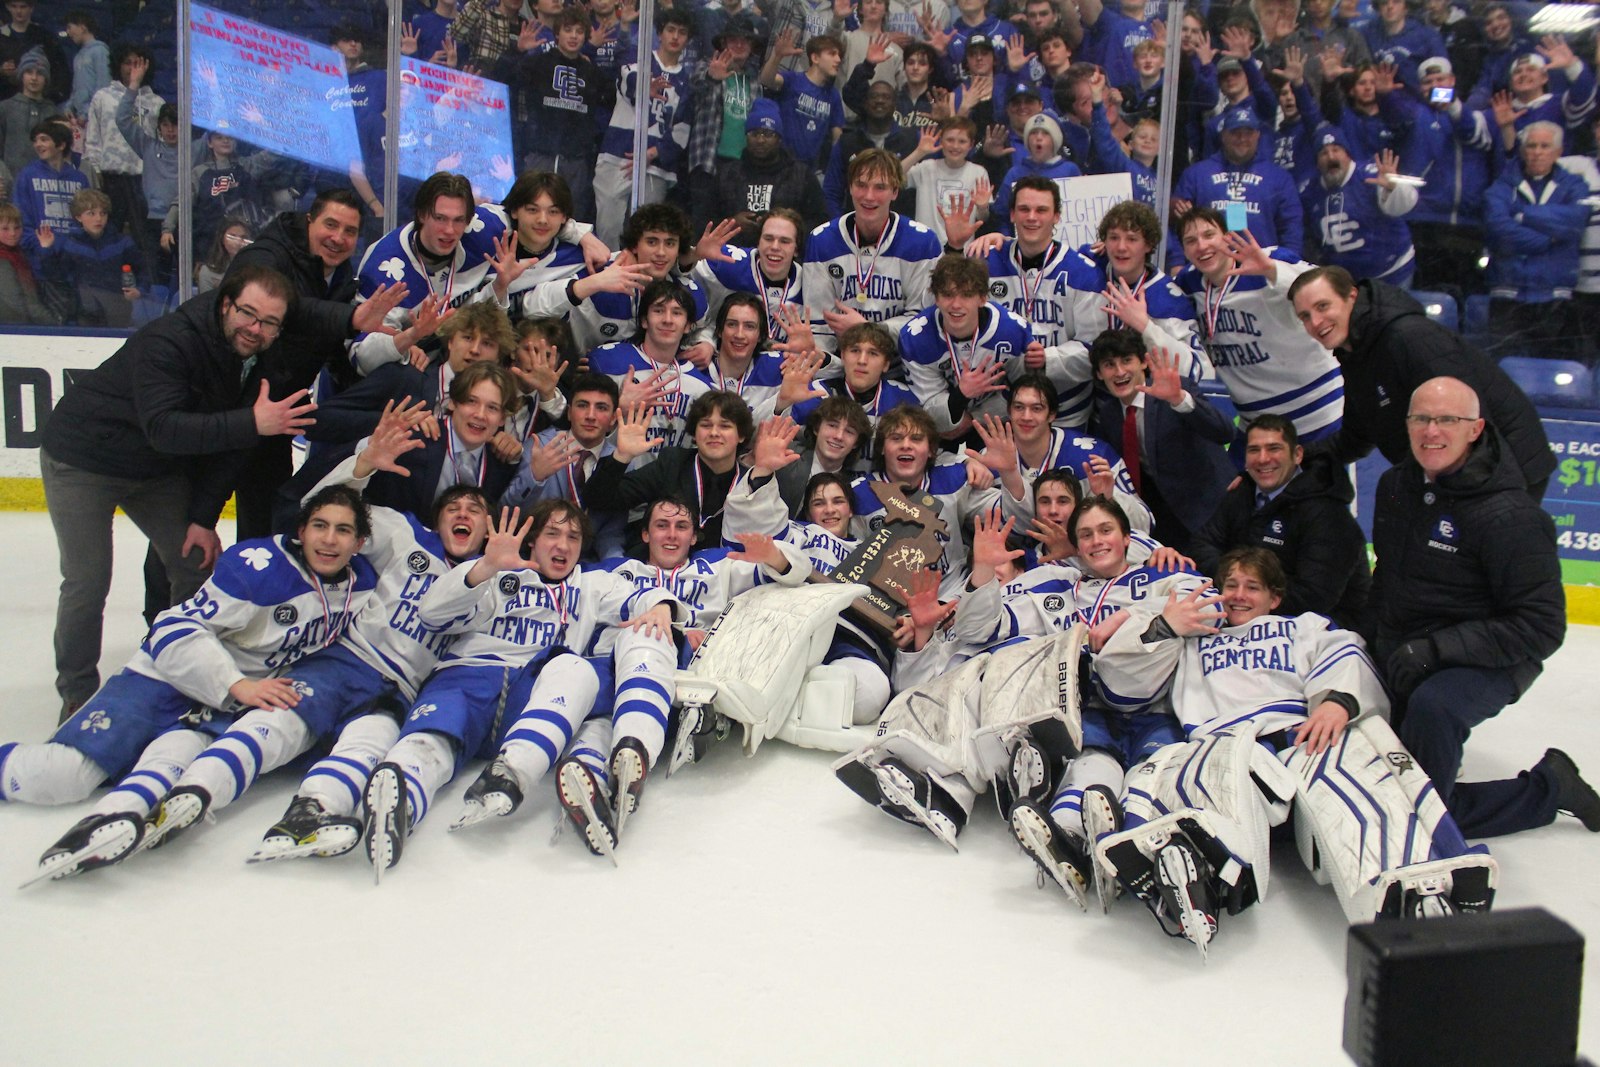 Catholic Central won its fifth straight ice hockey state title — and third in a row over Brighton — with a 2-0 victory Saturday night at USA Hockey Arena in Plymouth. (Photo by Wright Wilson | Special to Detroit Catholic)